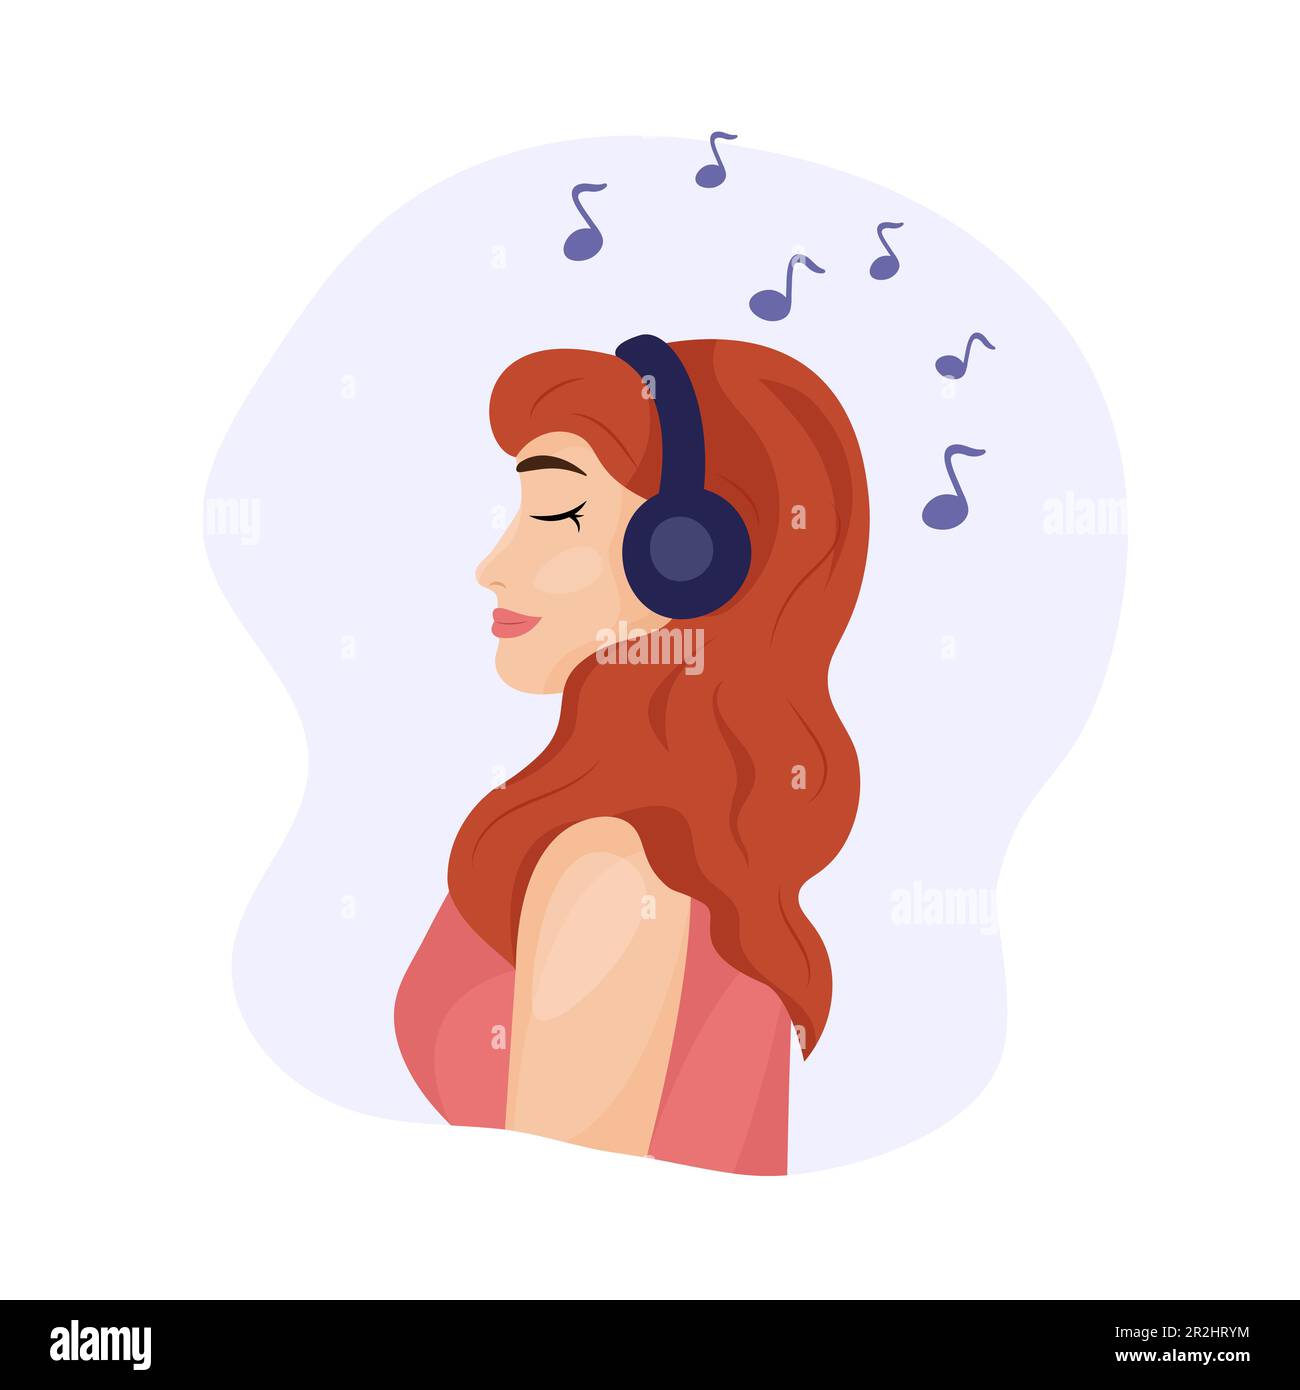 Girl witn headphones listening to music. Young adult woman profile and headset, musiacl notes. Smiling girl relaxing and enjoying music. Stock Vector